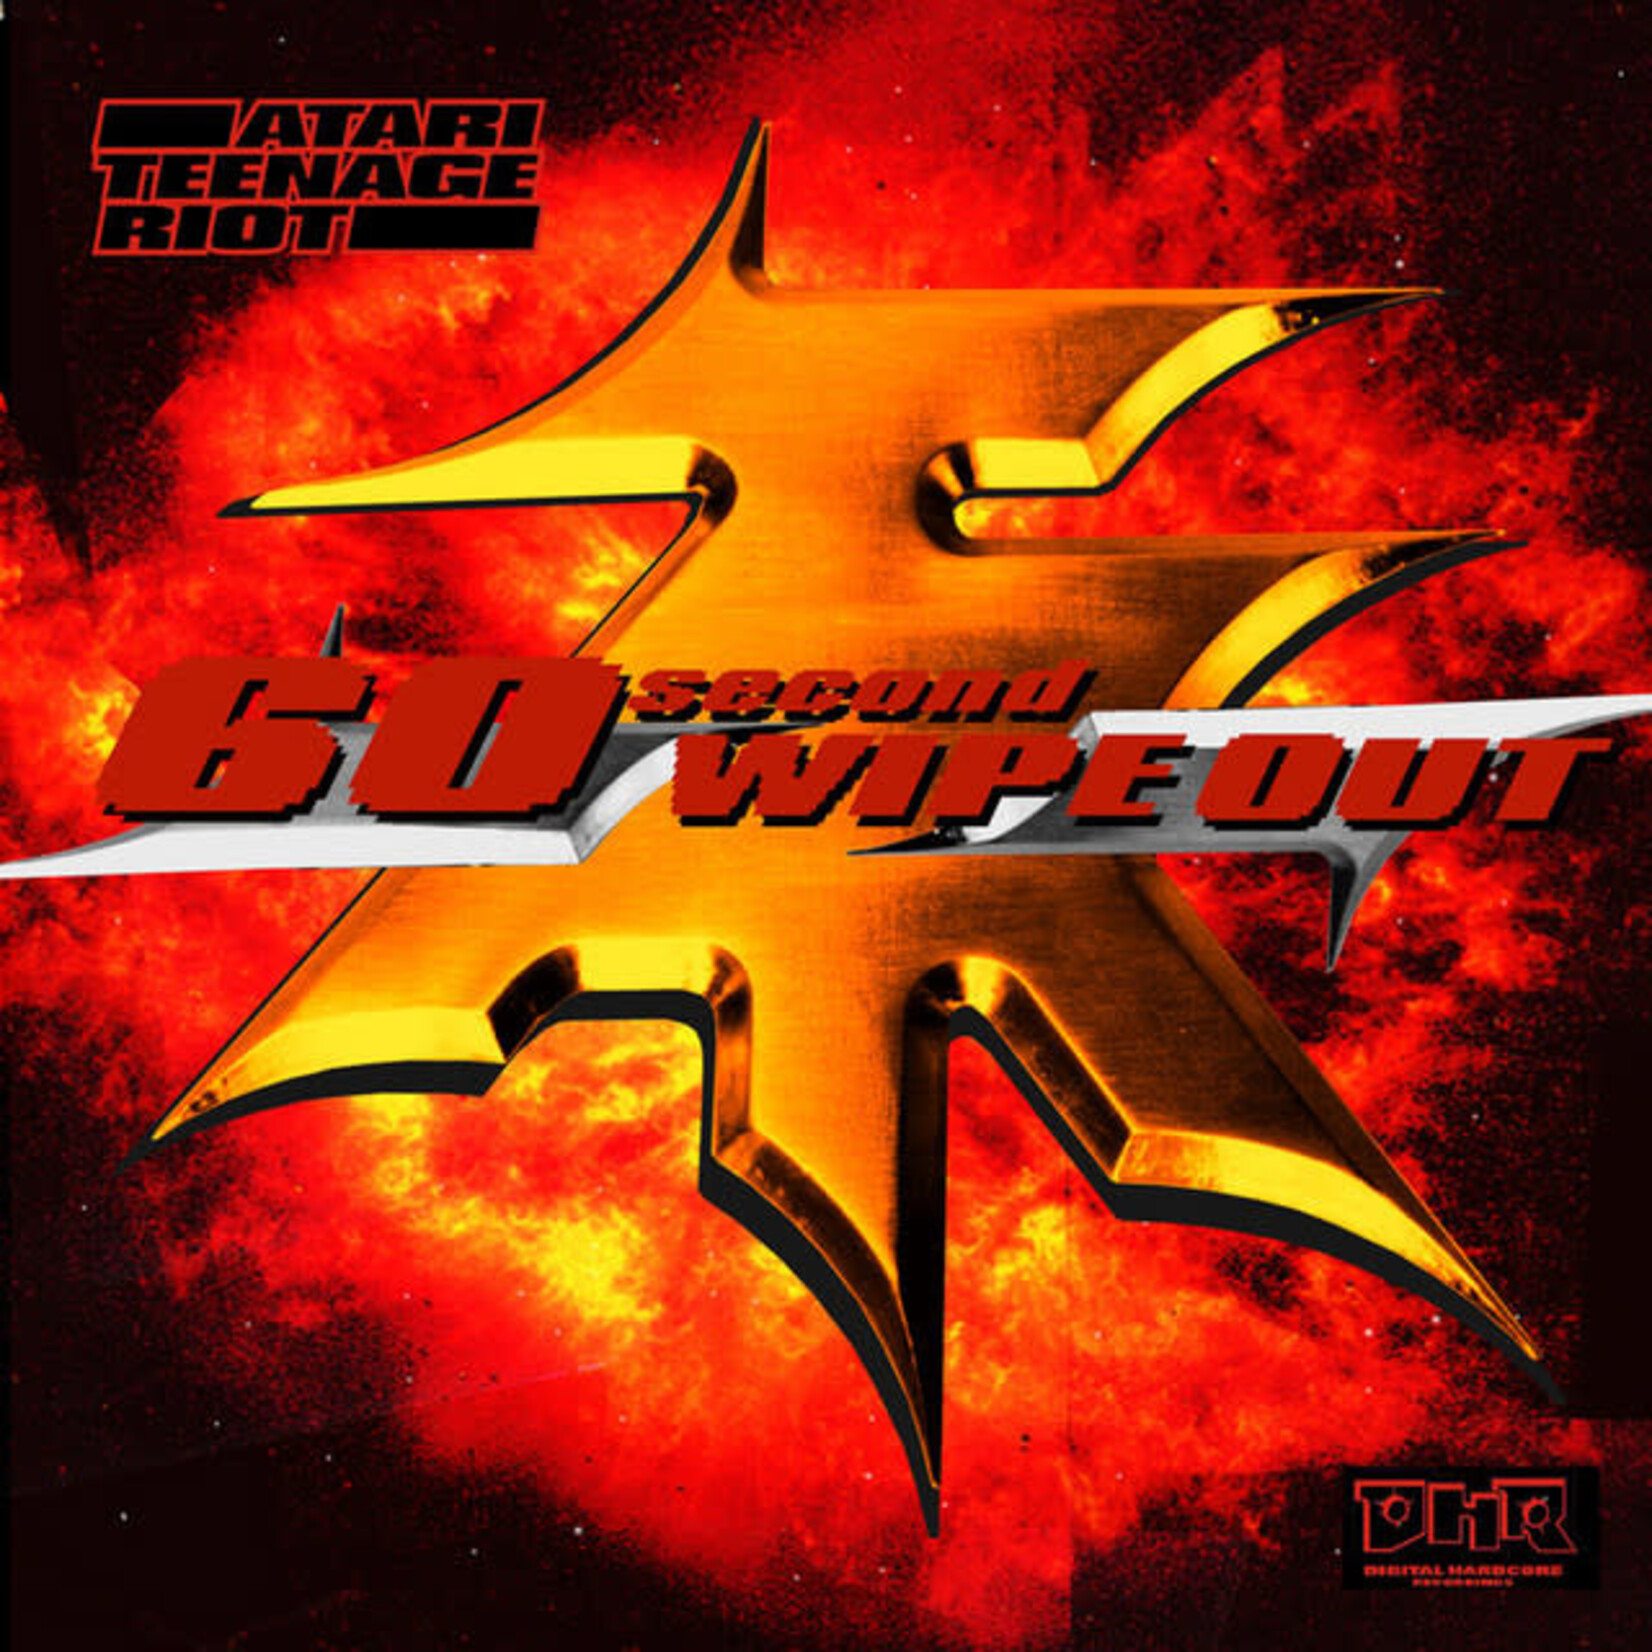 Atari Teenage Riot - 60 Second Wipe Out [USED CD]